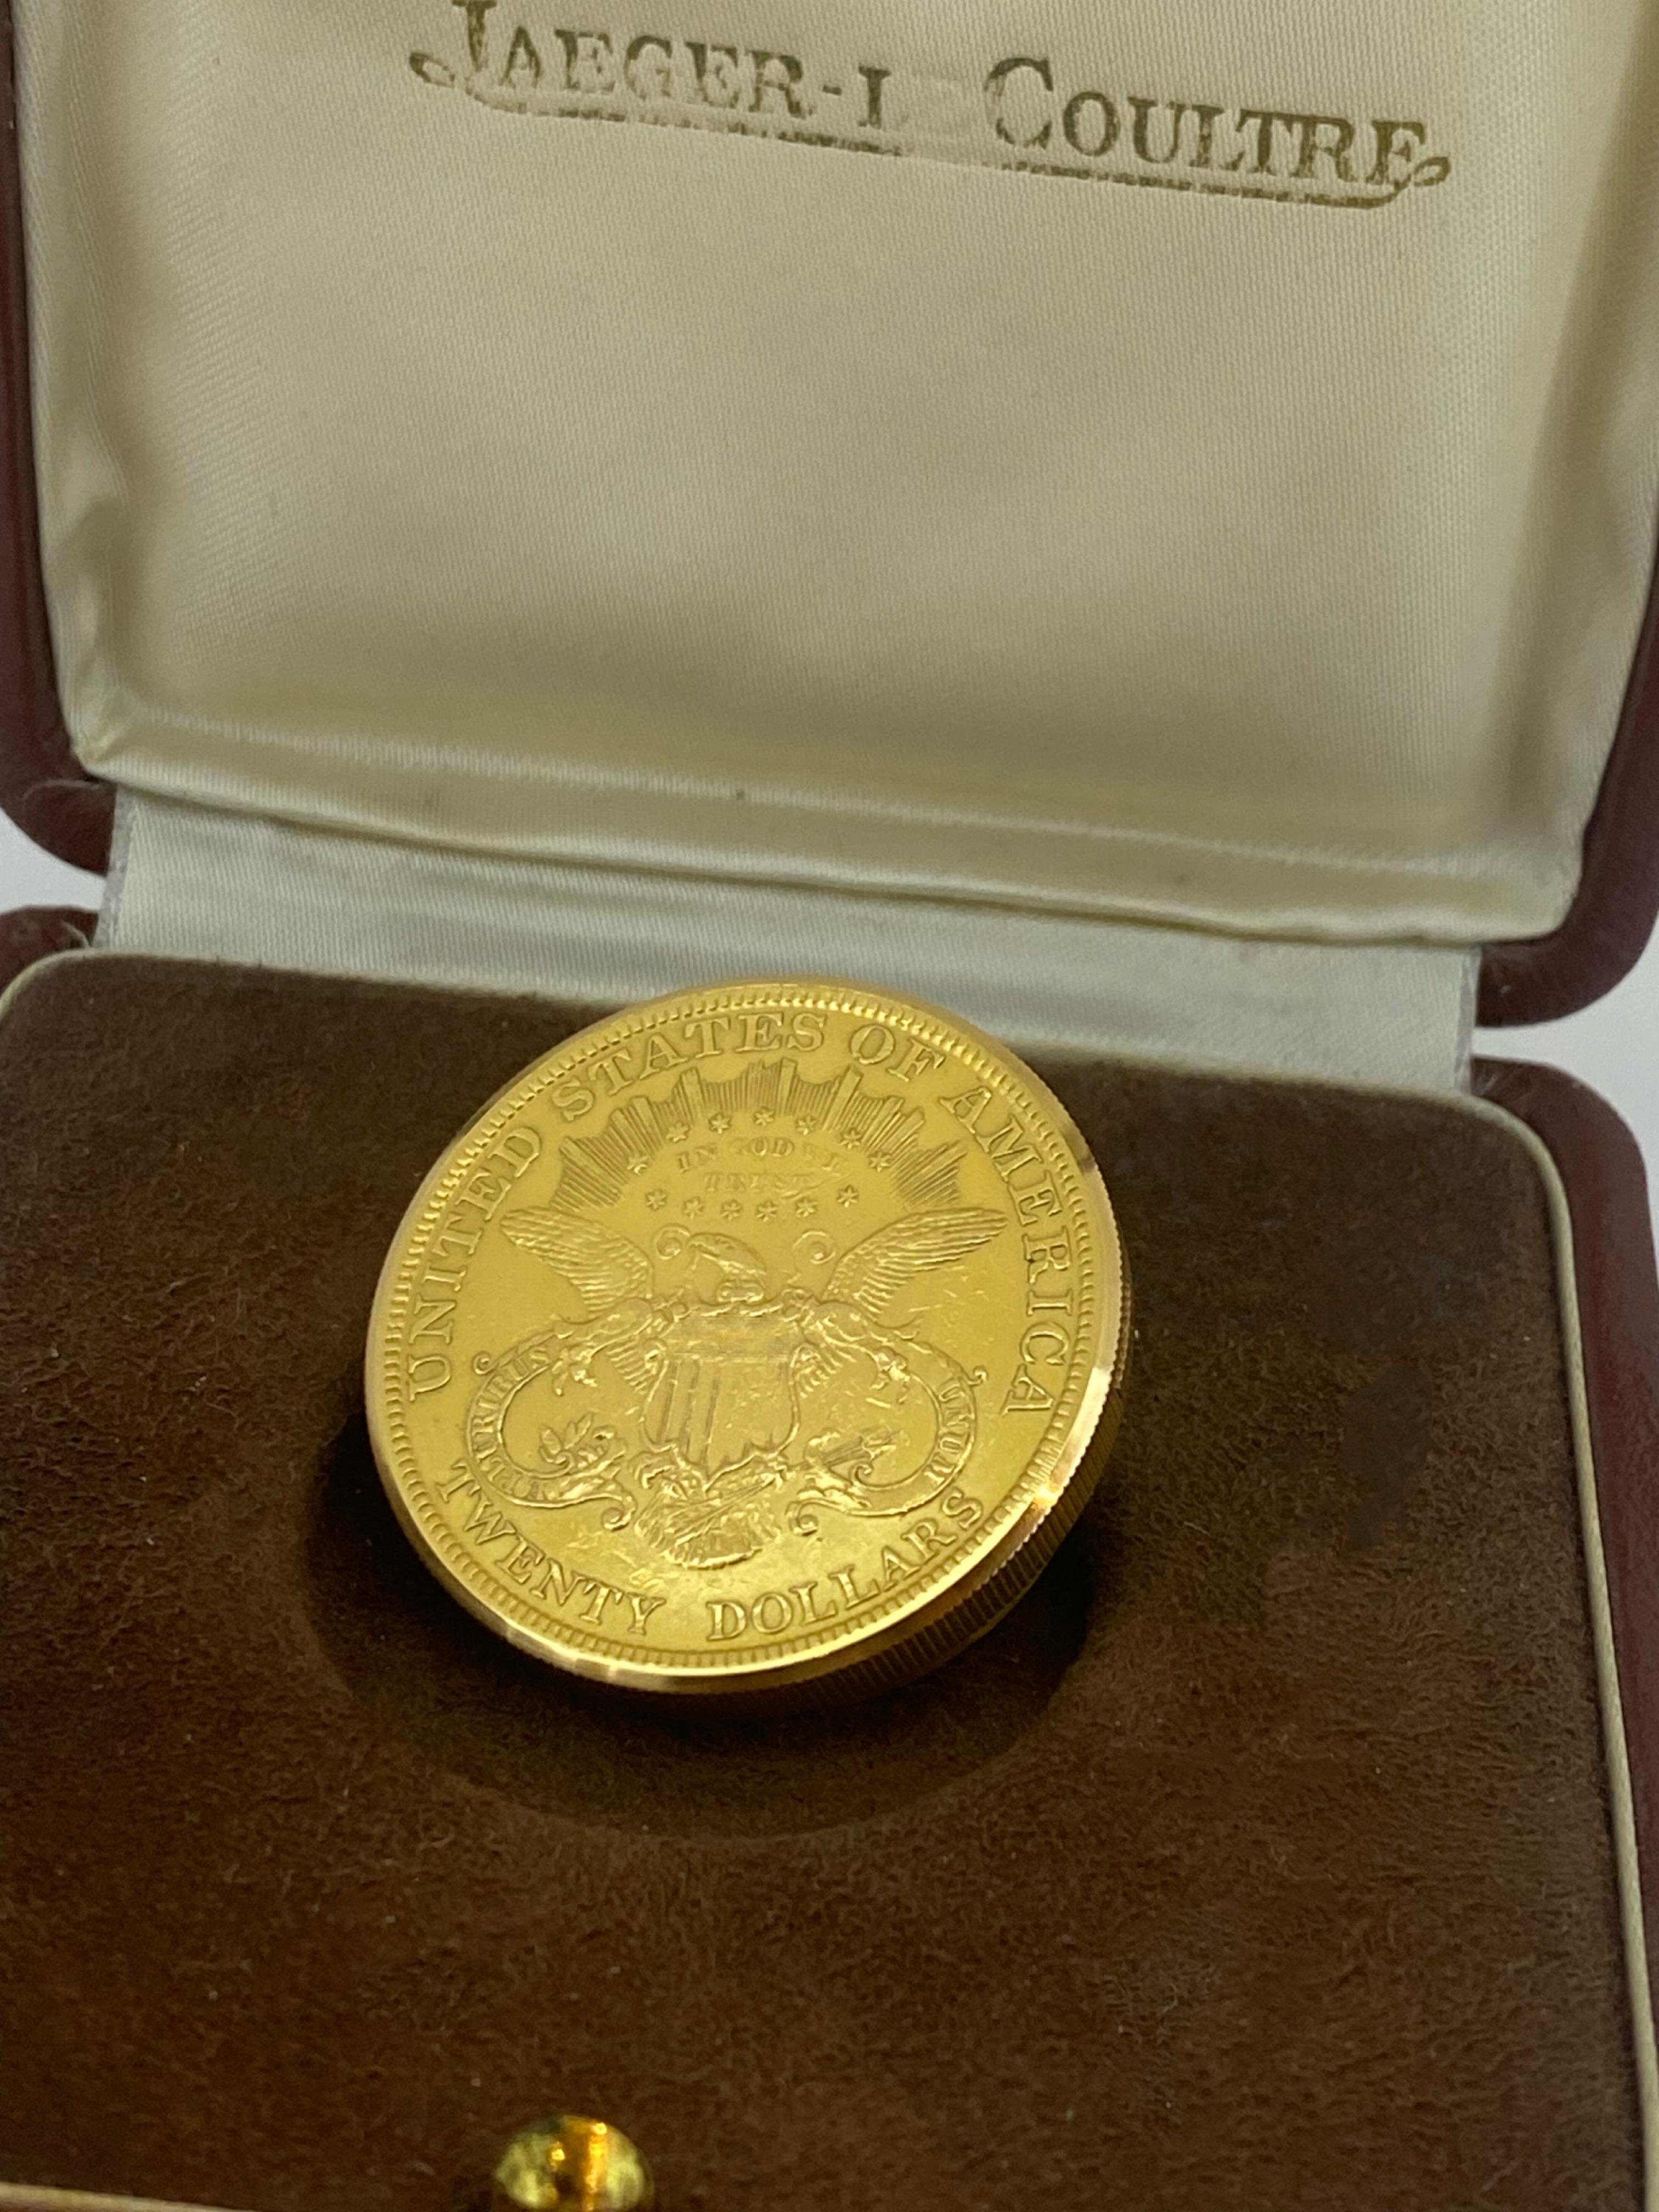 Jaeger-LeCoultre Fine & Very Rare 18K Yellow Gold US $20 Coin Watch, c1975. 4